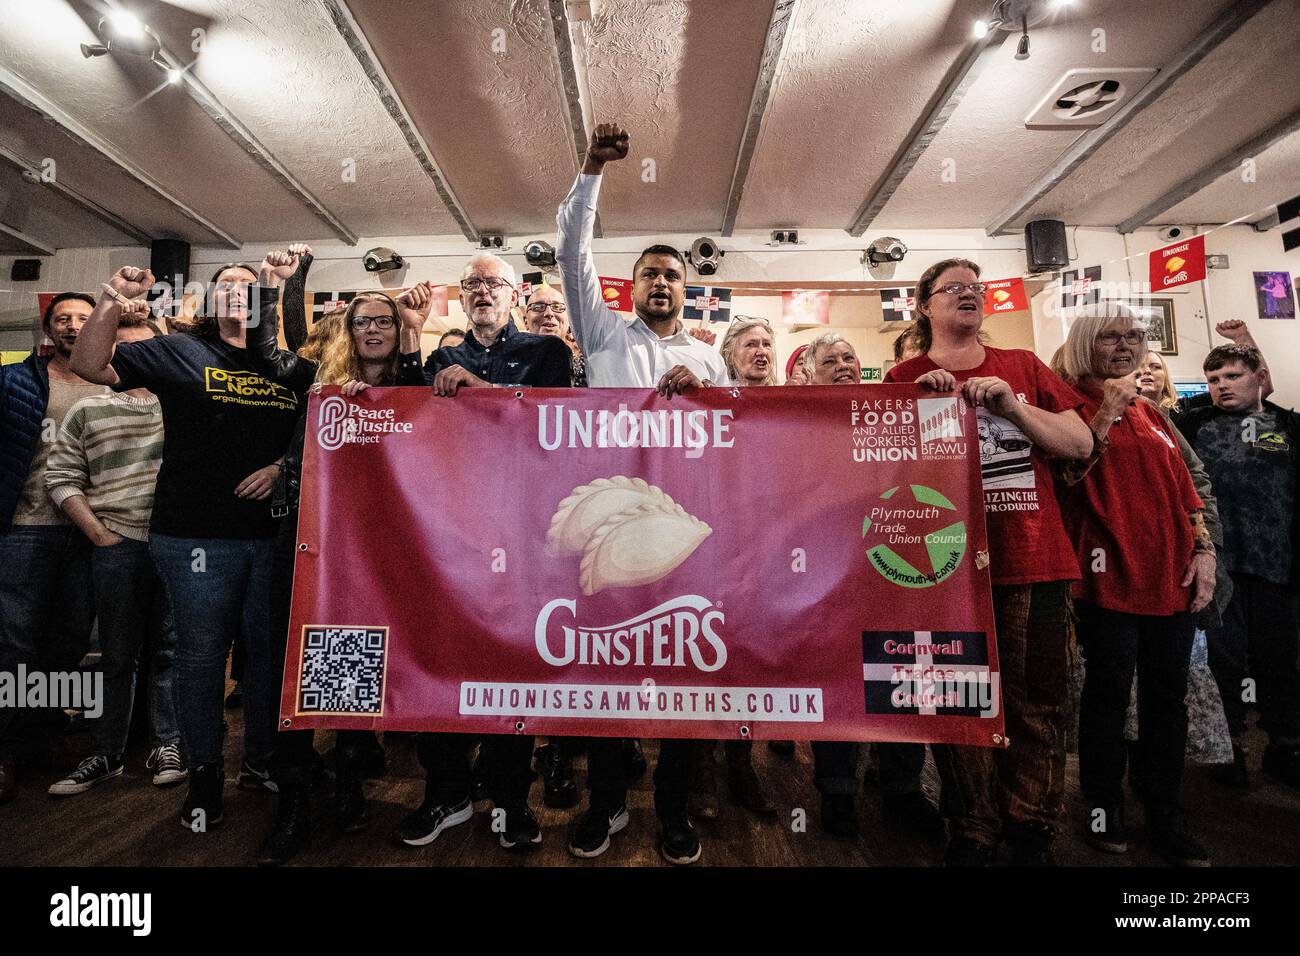 Former Labour leader Jeremy Corbyn MP stands alongside members of the public inside the Callington Social Club in Callington, North Cornwall as staff vote on the unionisation of the factory. Stock Photo